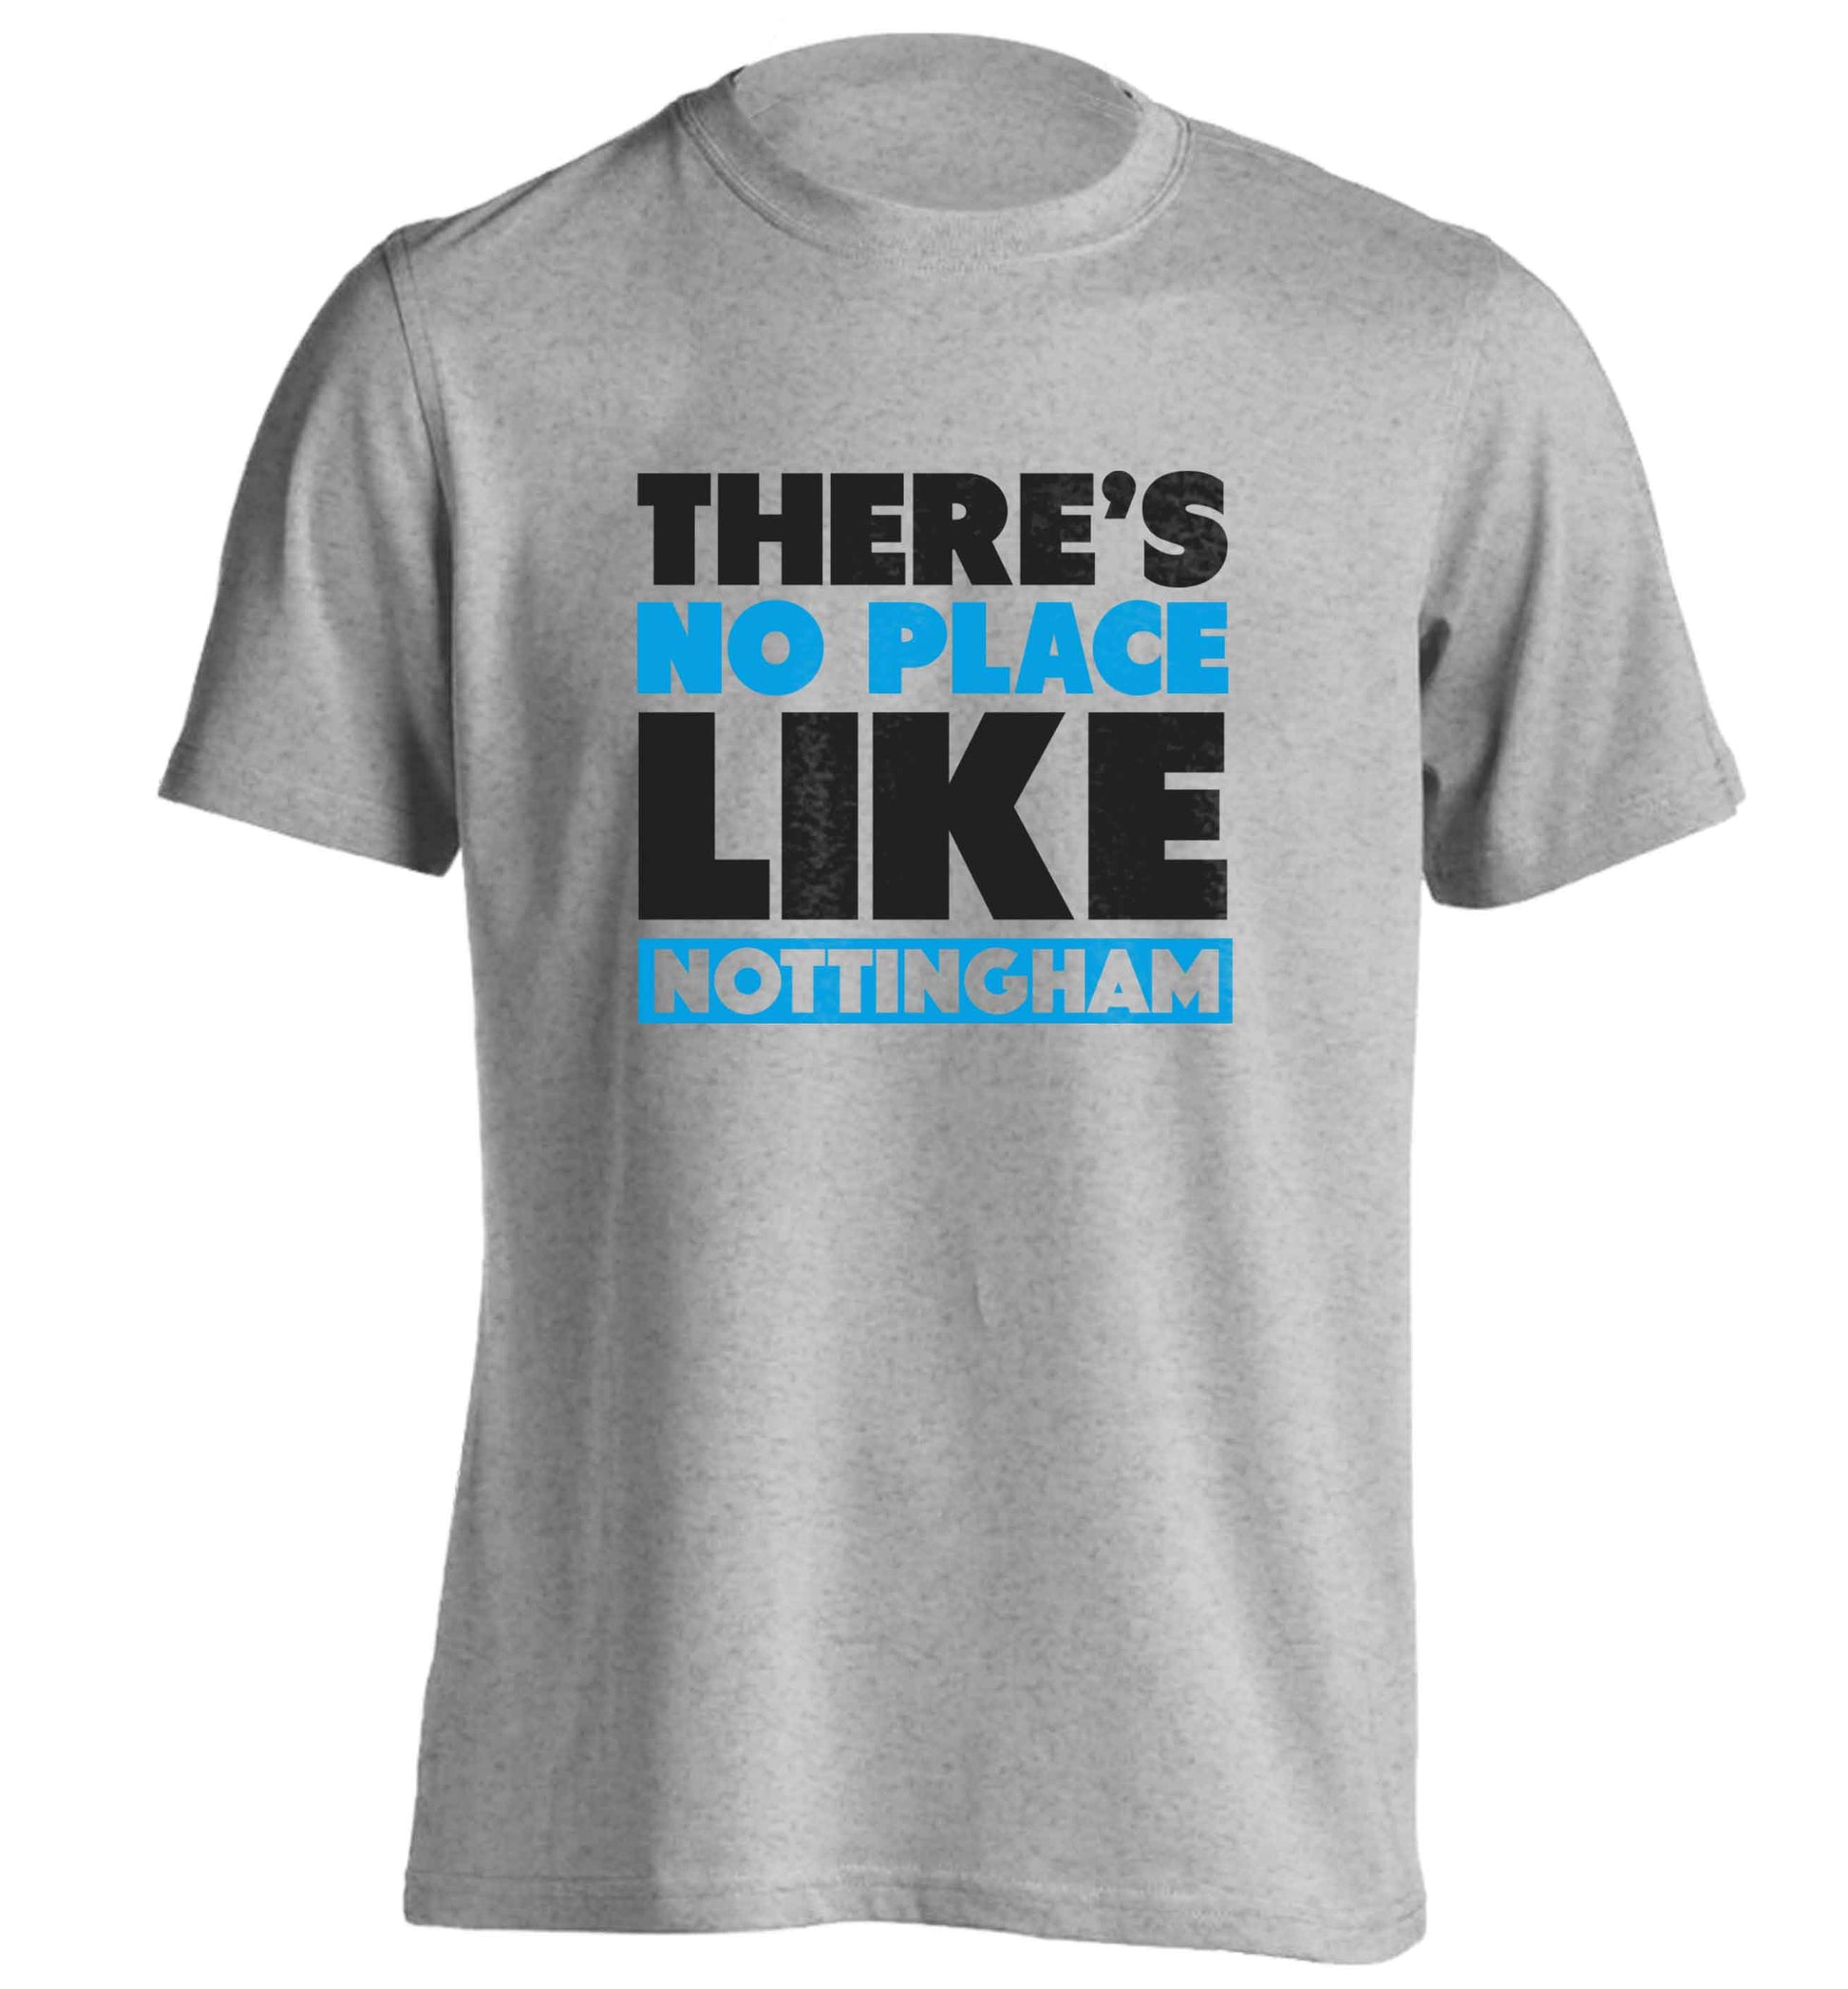 There's no place like Nottingham adults unisex grey Tshirt 2XL